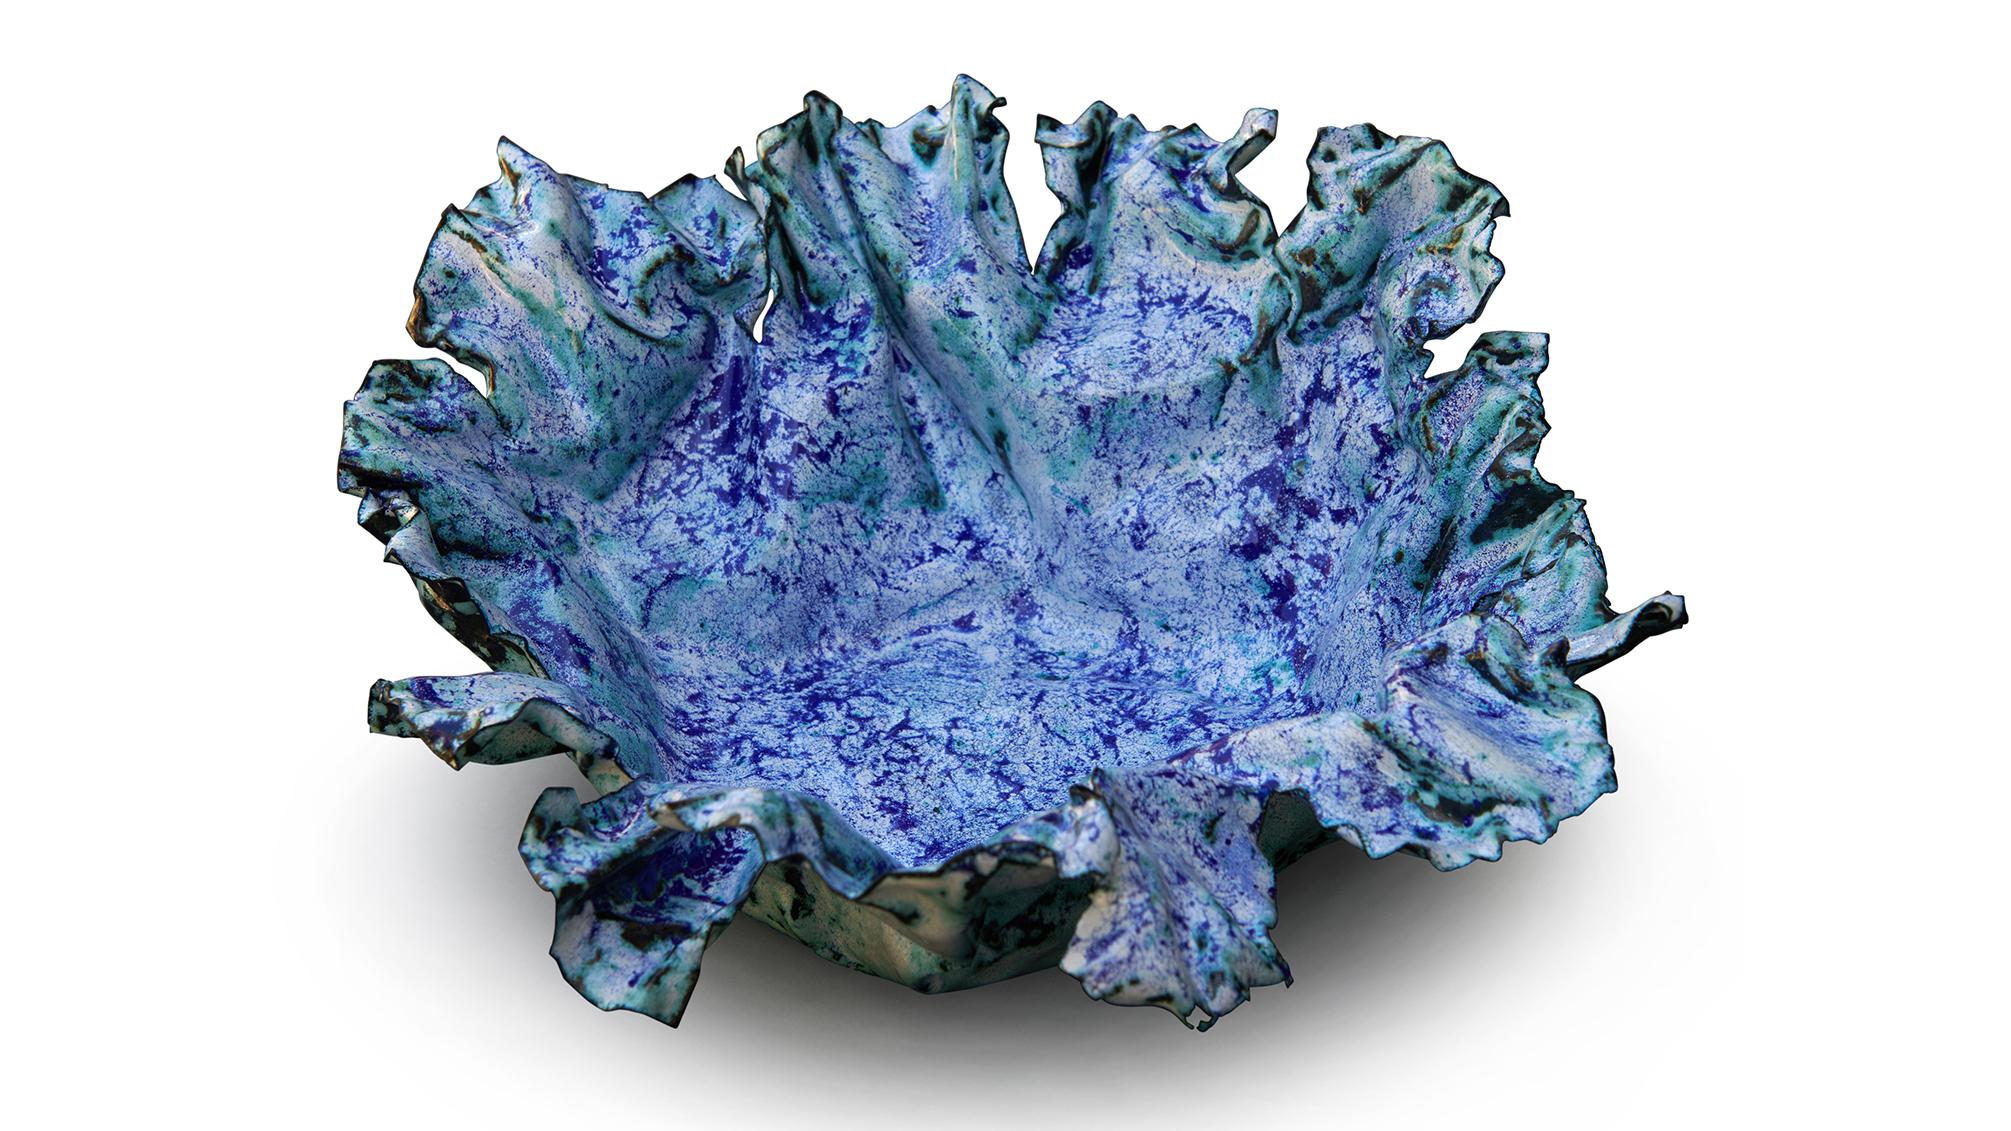 This custom shaped bowl has an organic flow with edges that have been carefully sculpted to add a visual interest to the shape. The blue color has been gently dappled on to a white layer, creating many hues of blues.